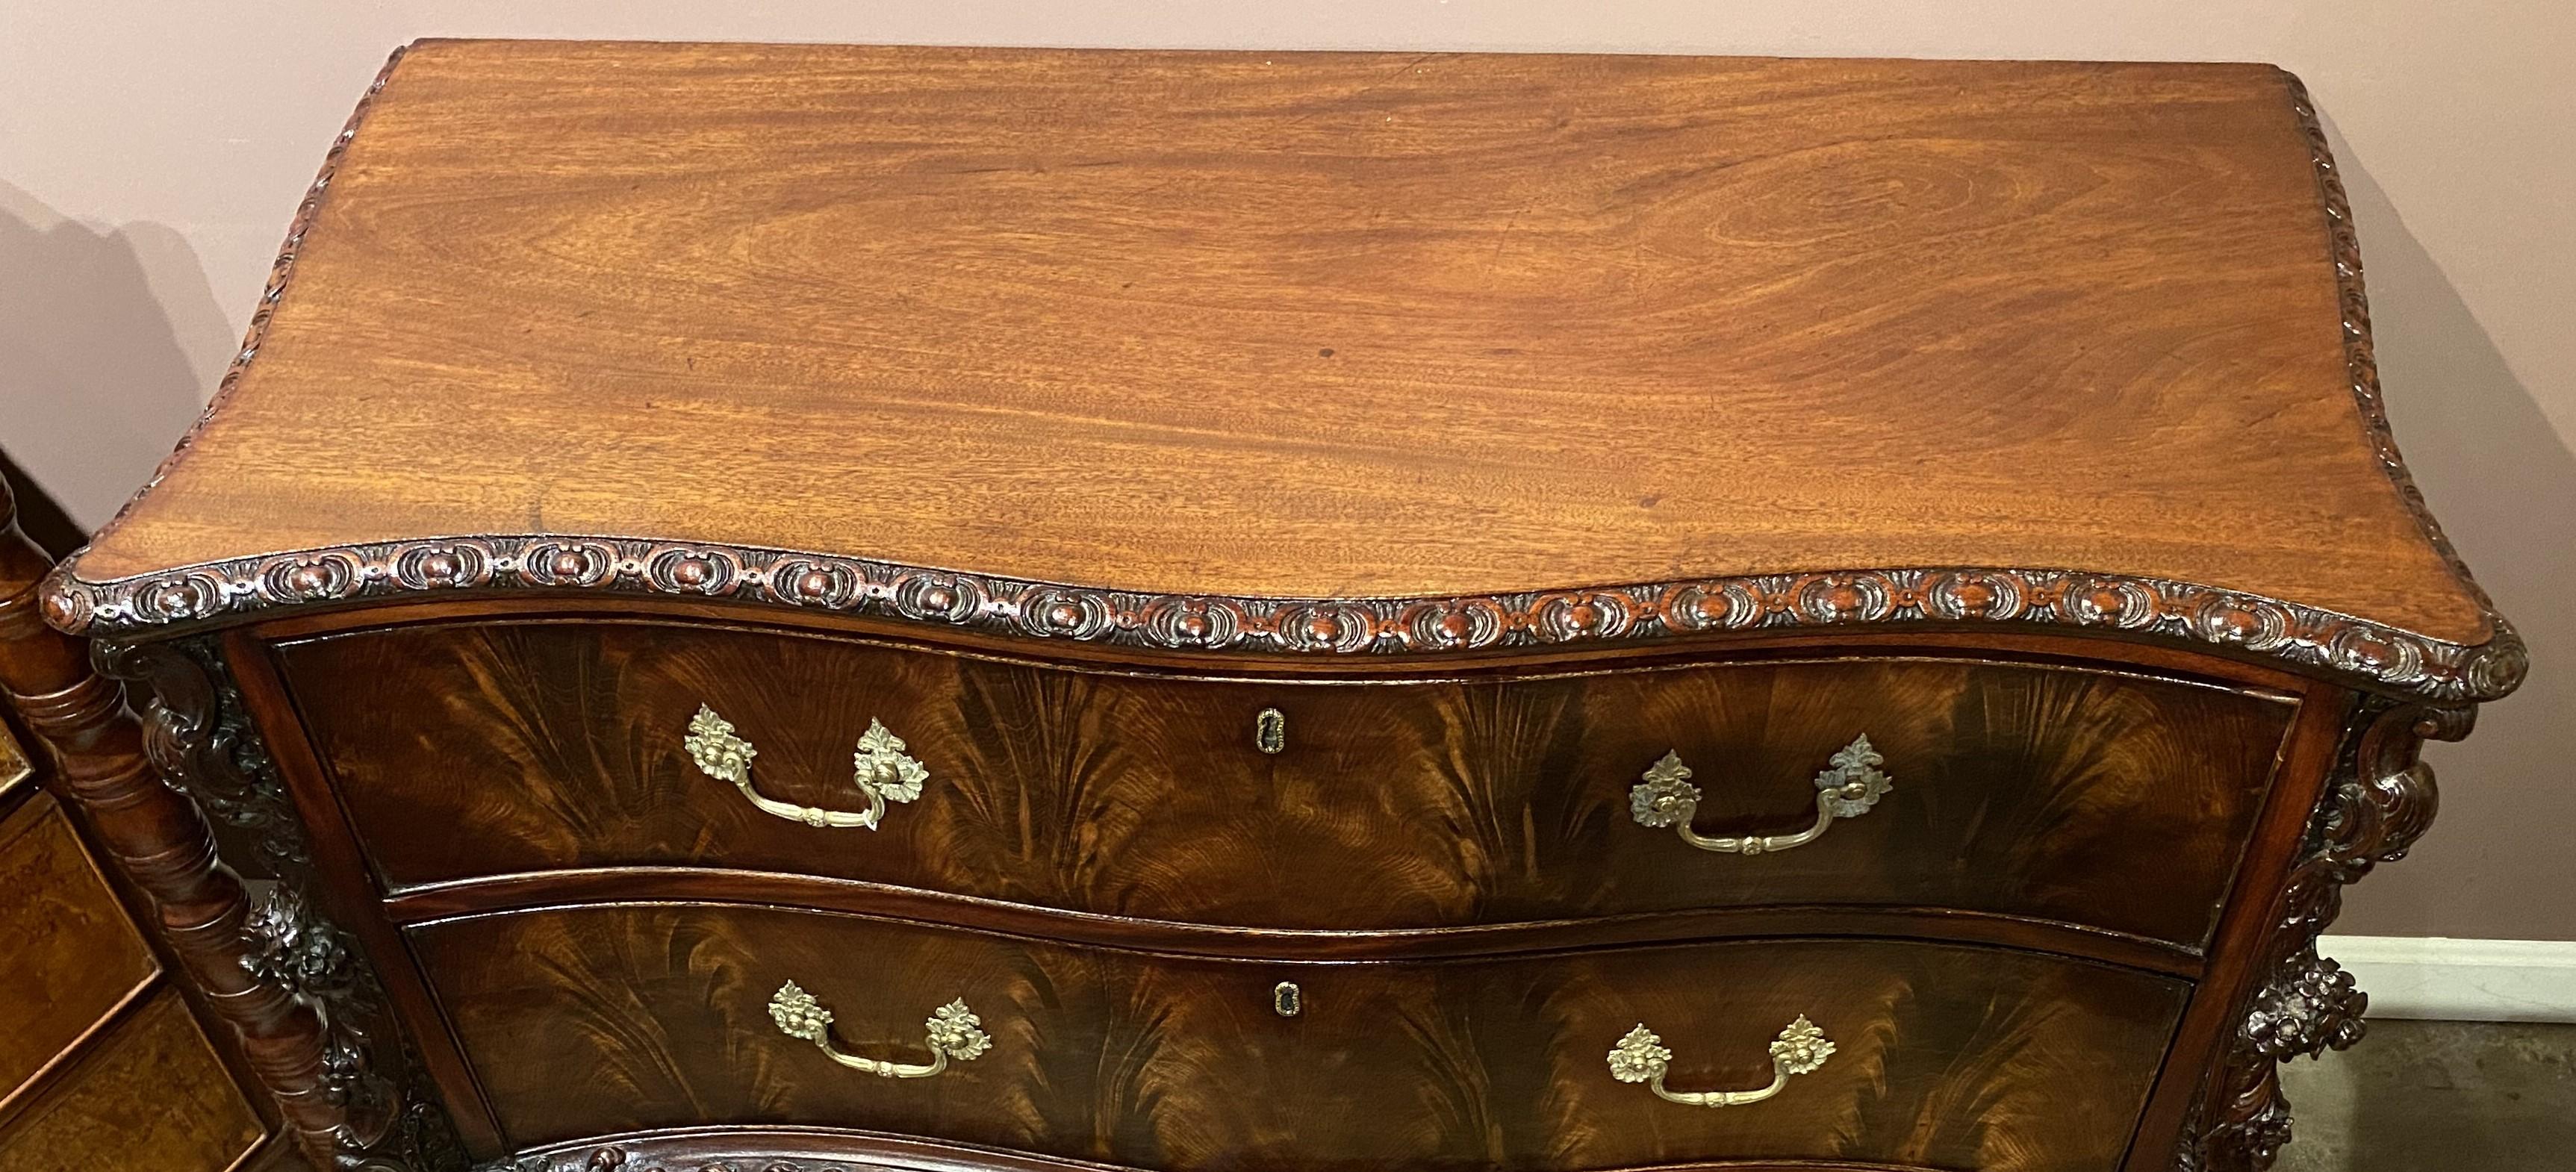 A spectacular Rococo Revival mahogany heavily carved serpentine two drawer commode, with a conforming top with carved border surmounting a case with two long drawers, each with foliate decorated pulls and bookmatched crotched mahogany veneers,